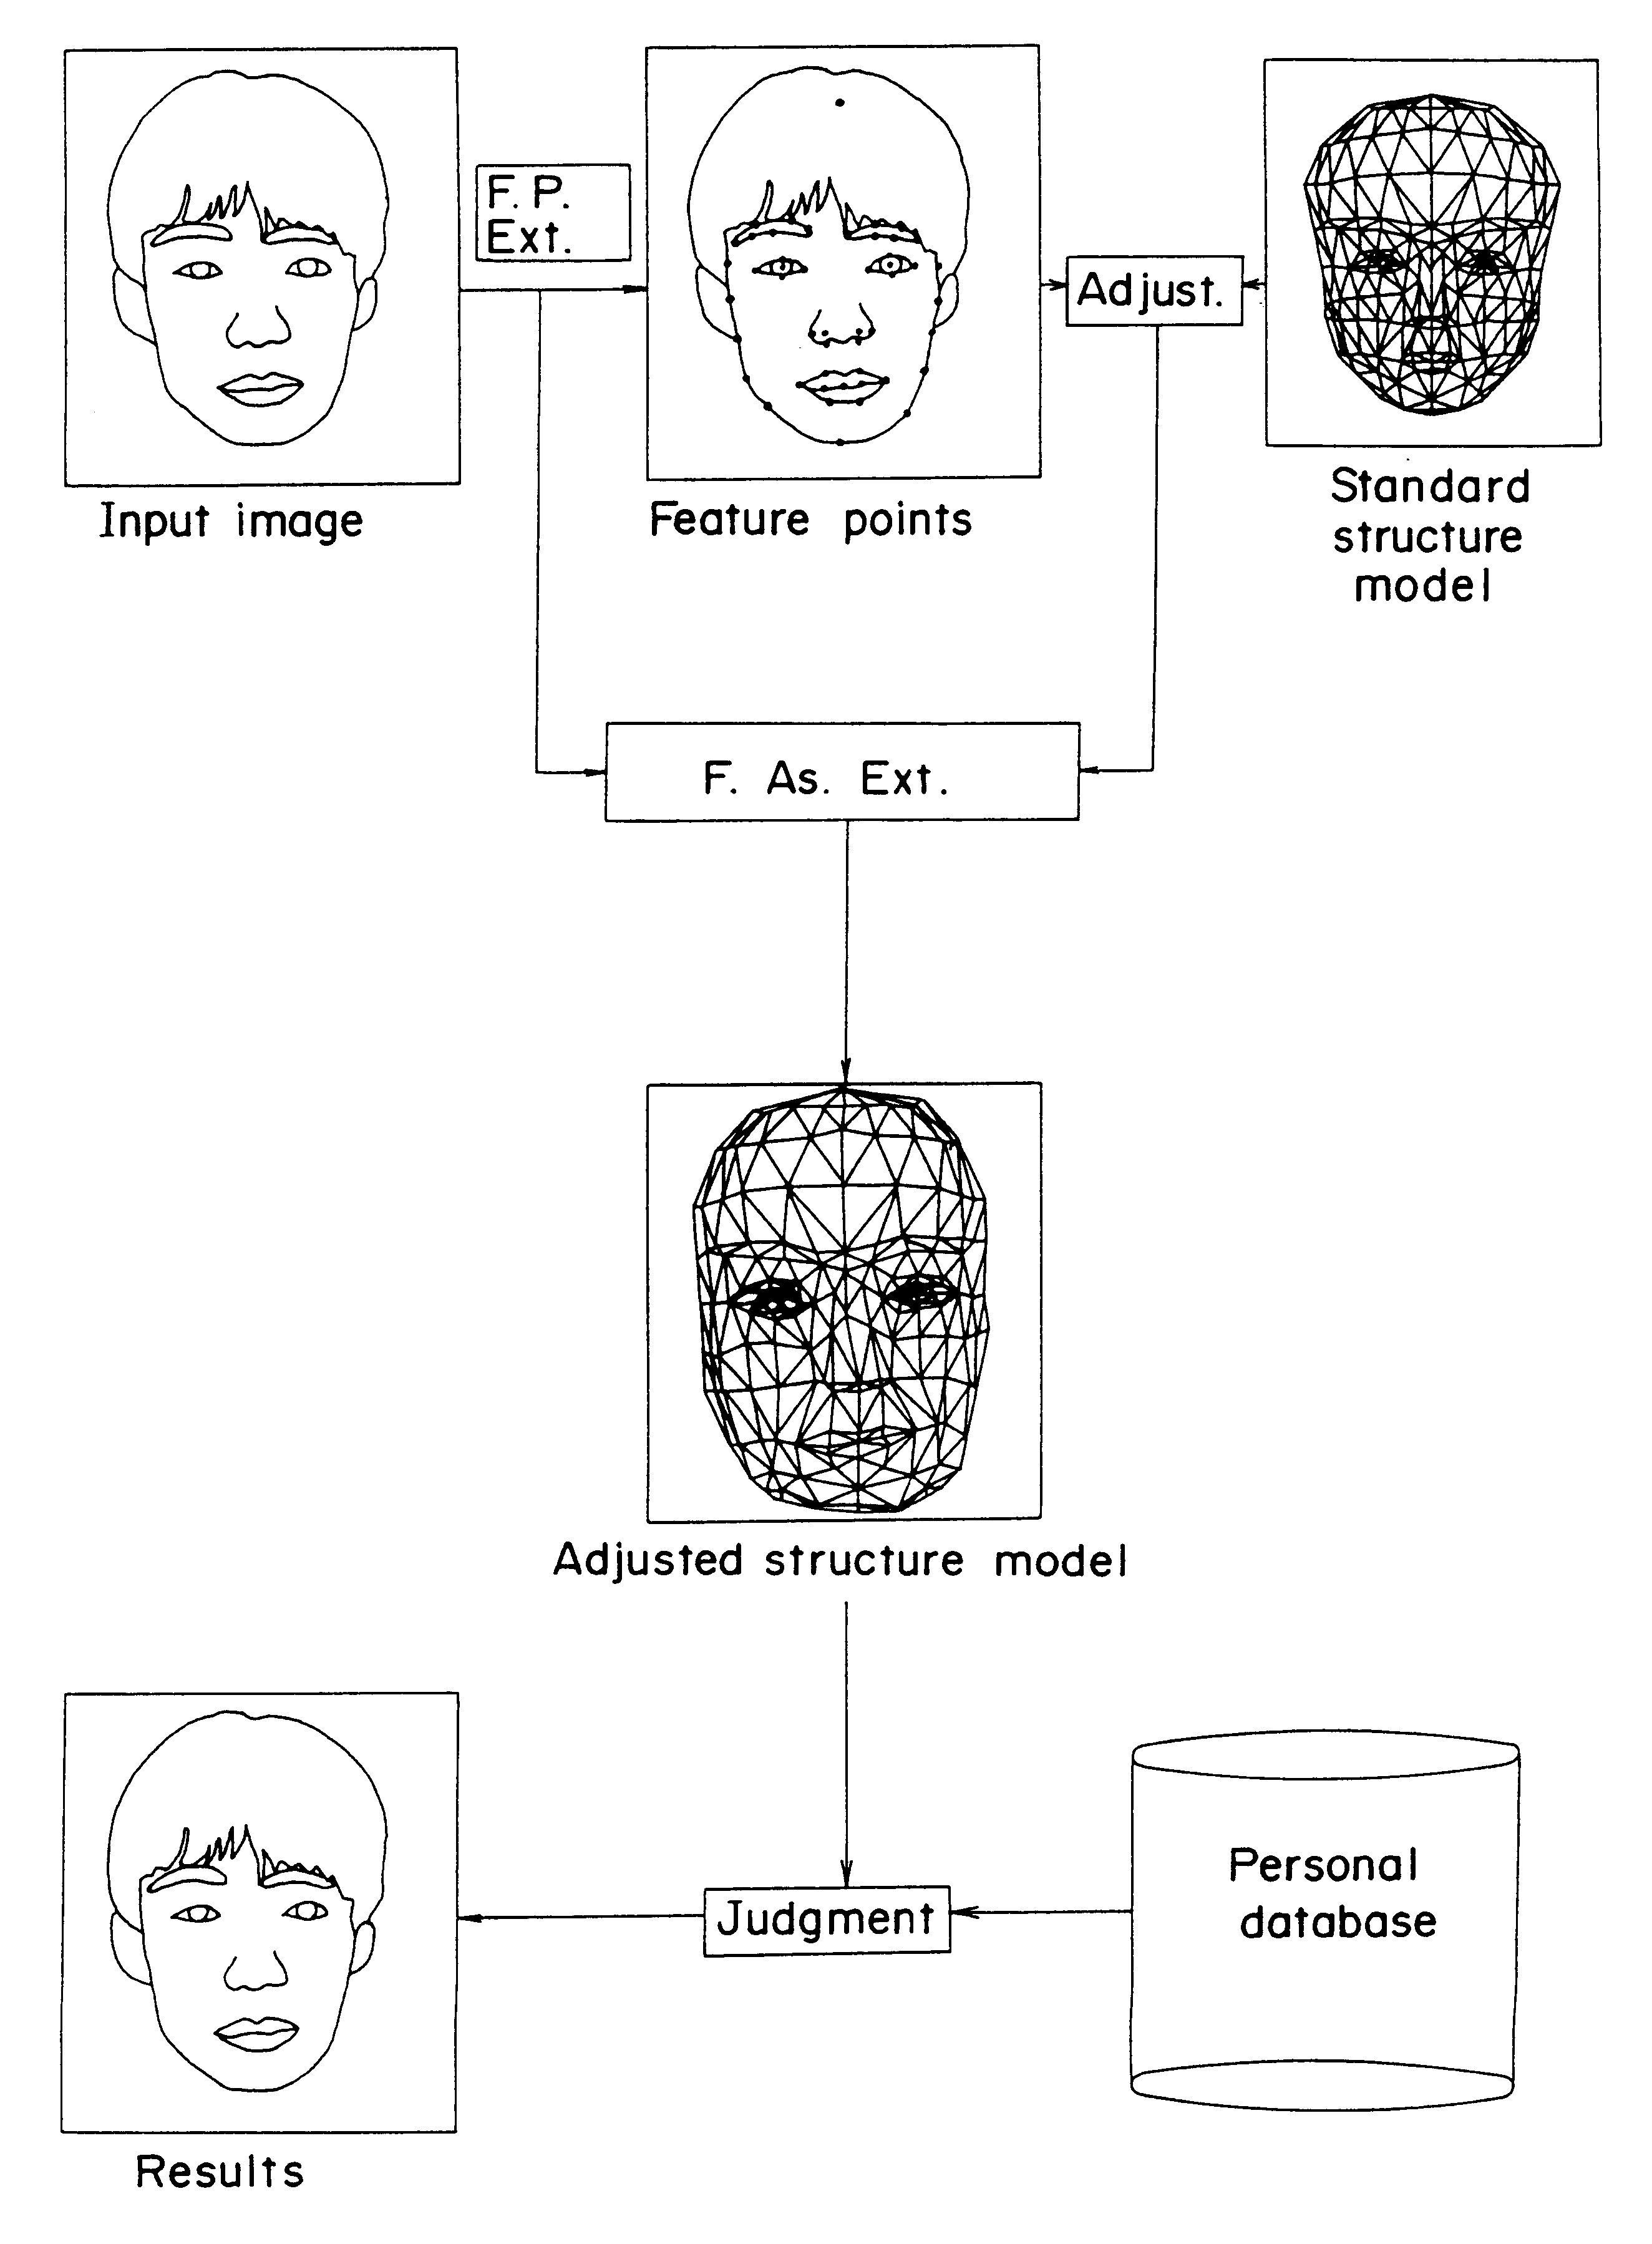 Apparatus for identifying a person using facial features